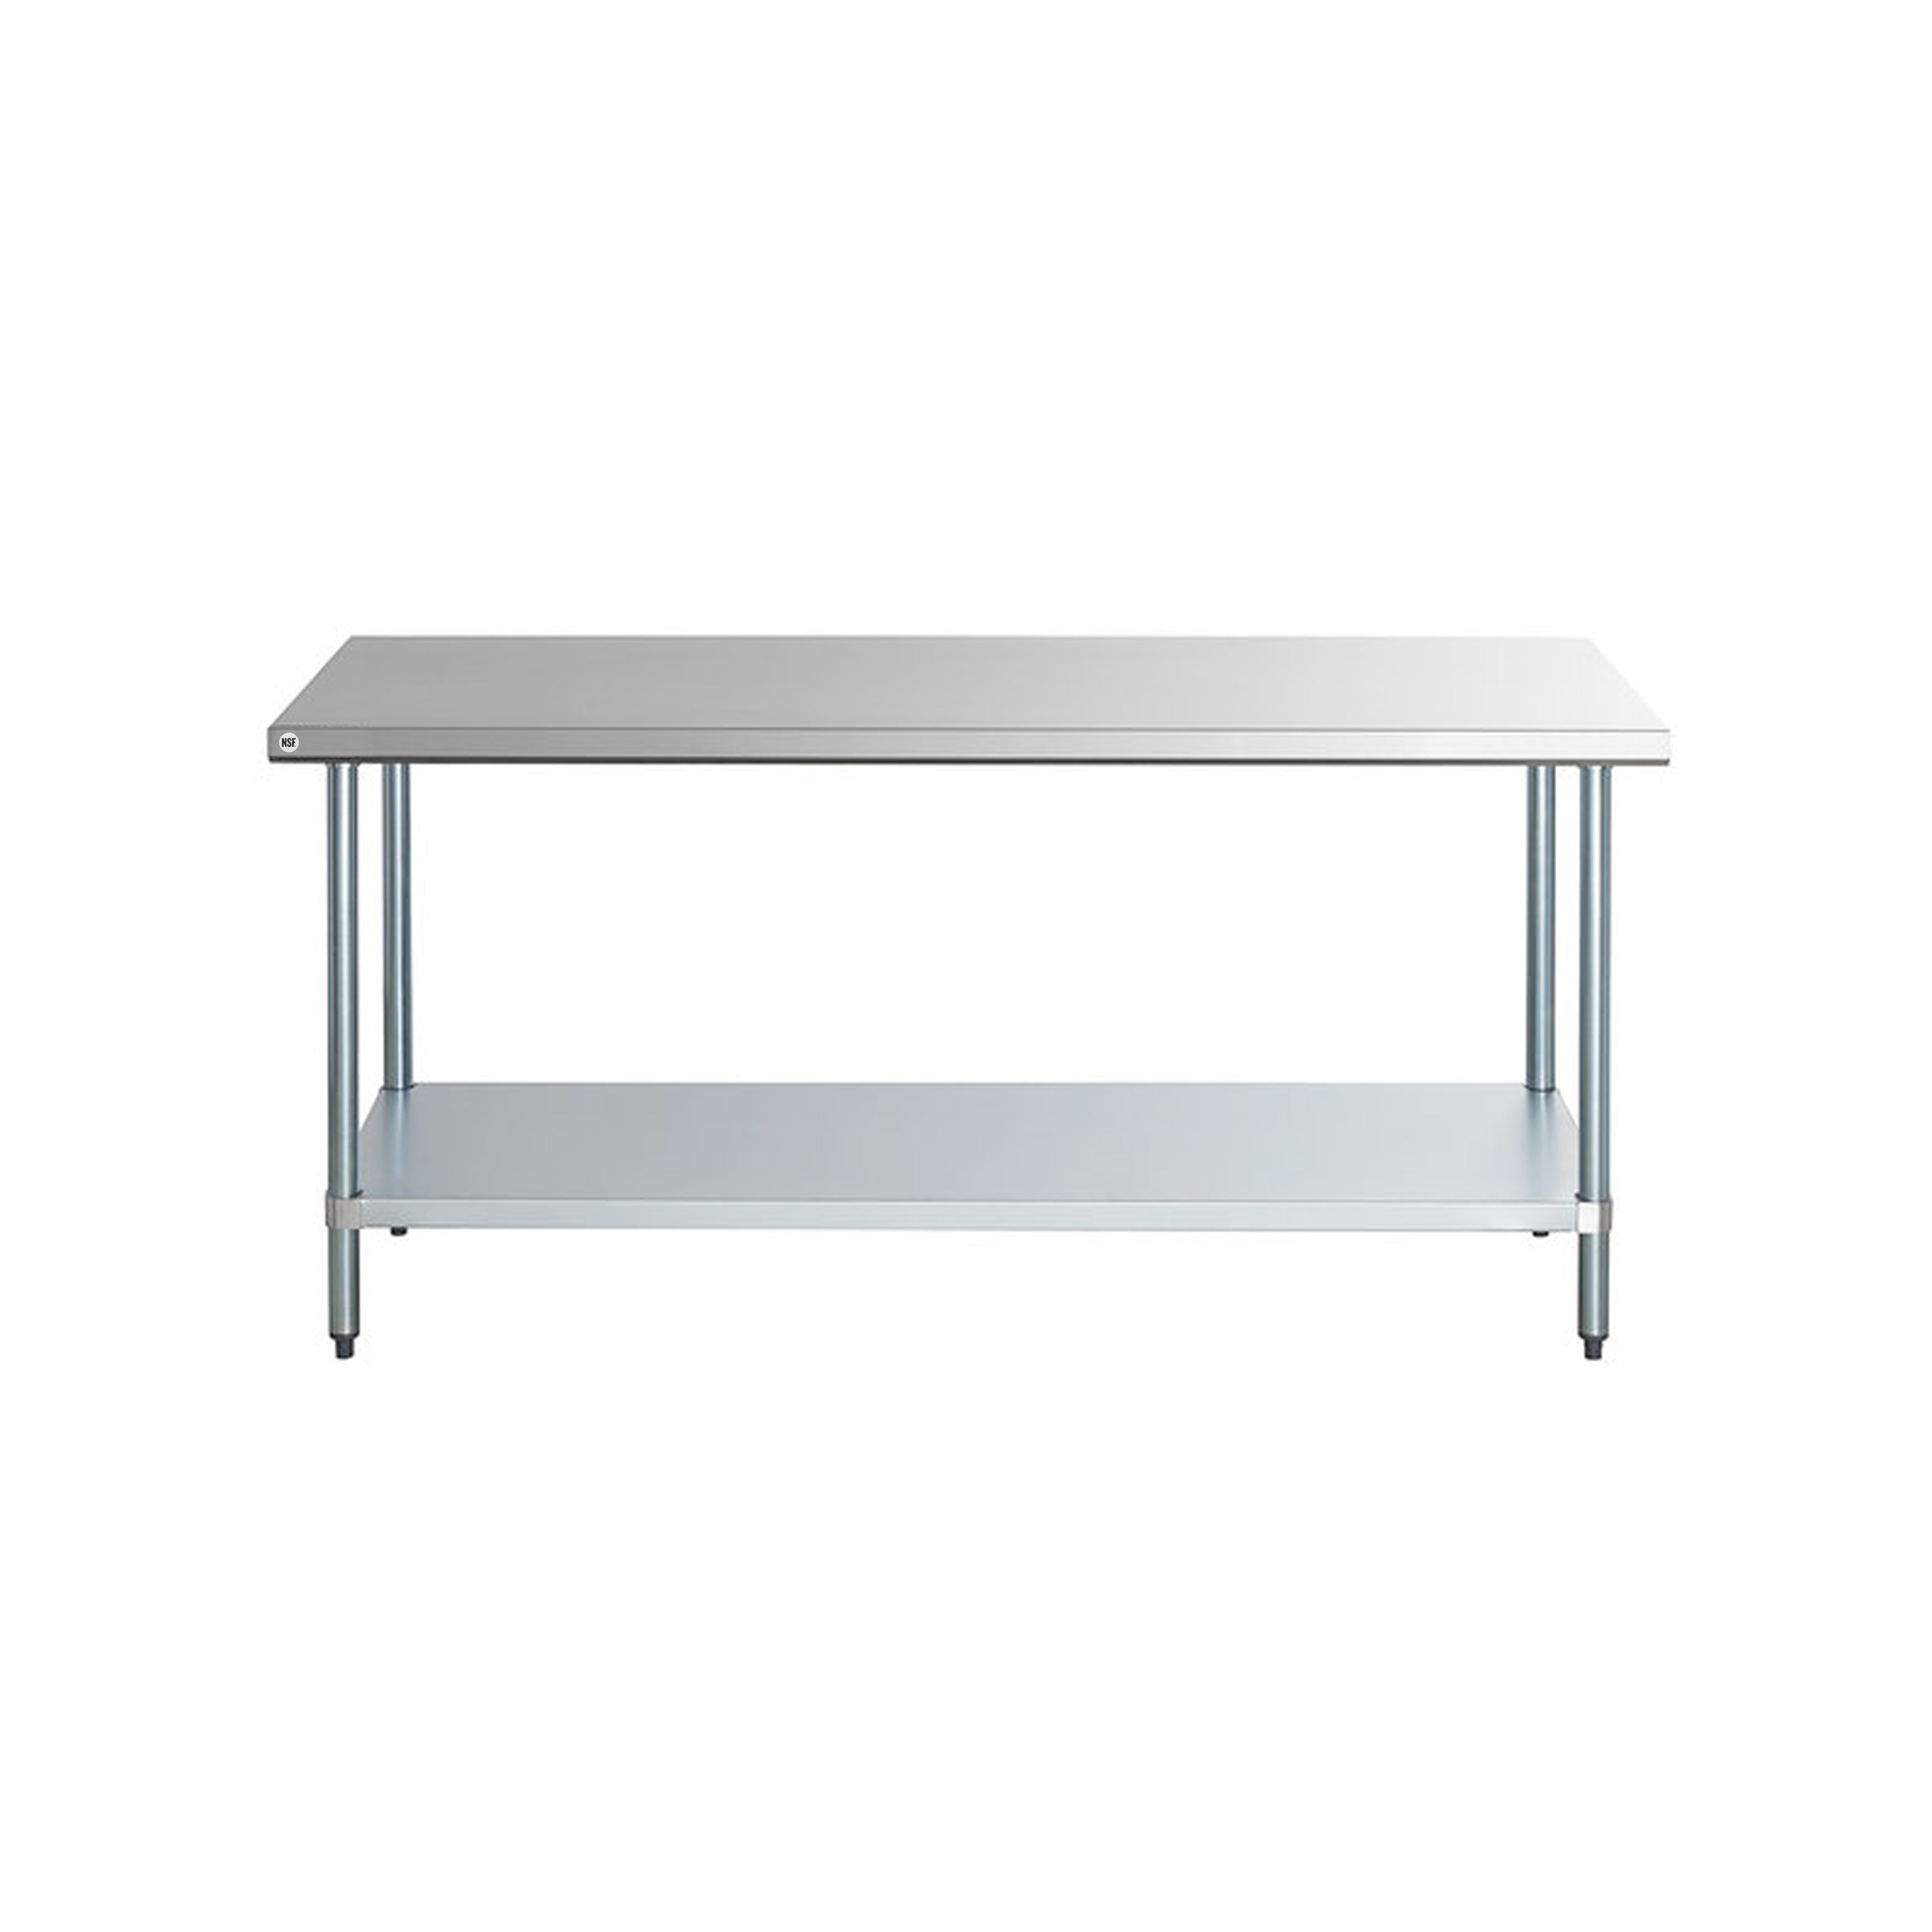 Omcan - 17581, Commercial 60" x 24" Stainless Steel Kitchen Work Table 1100lbs Medium Duty